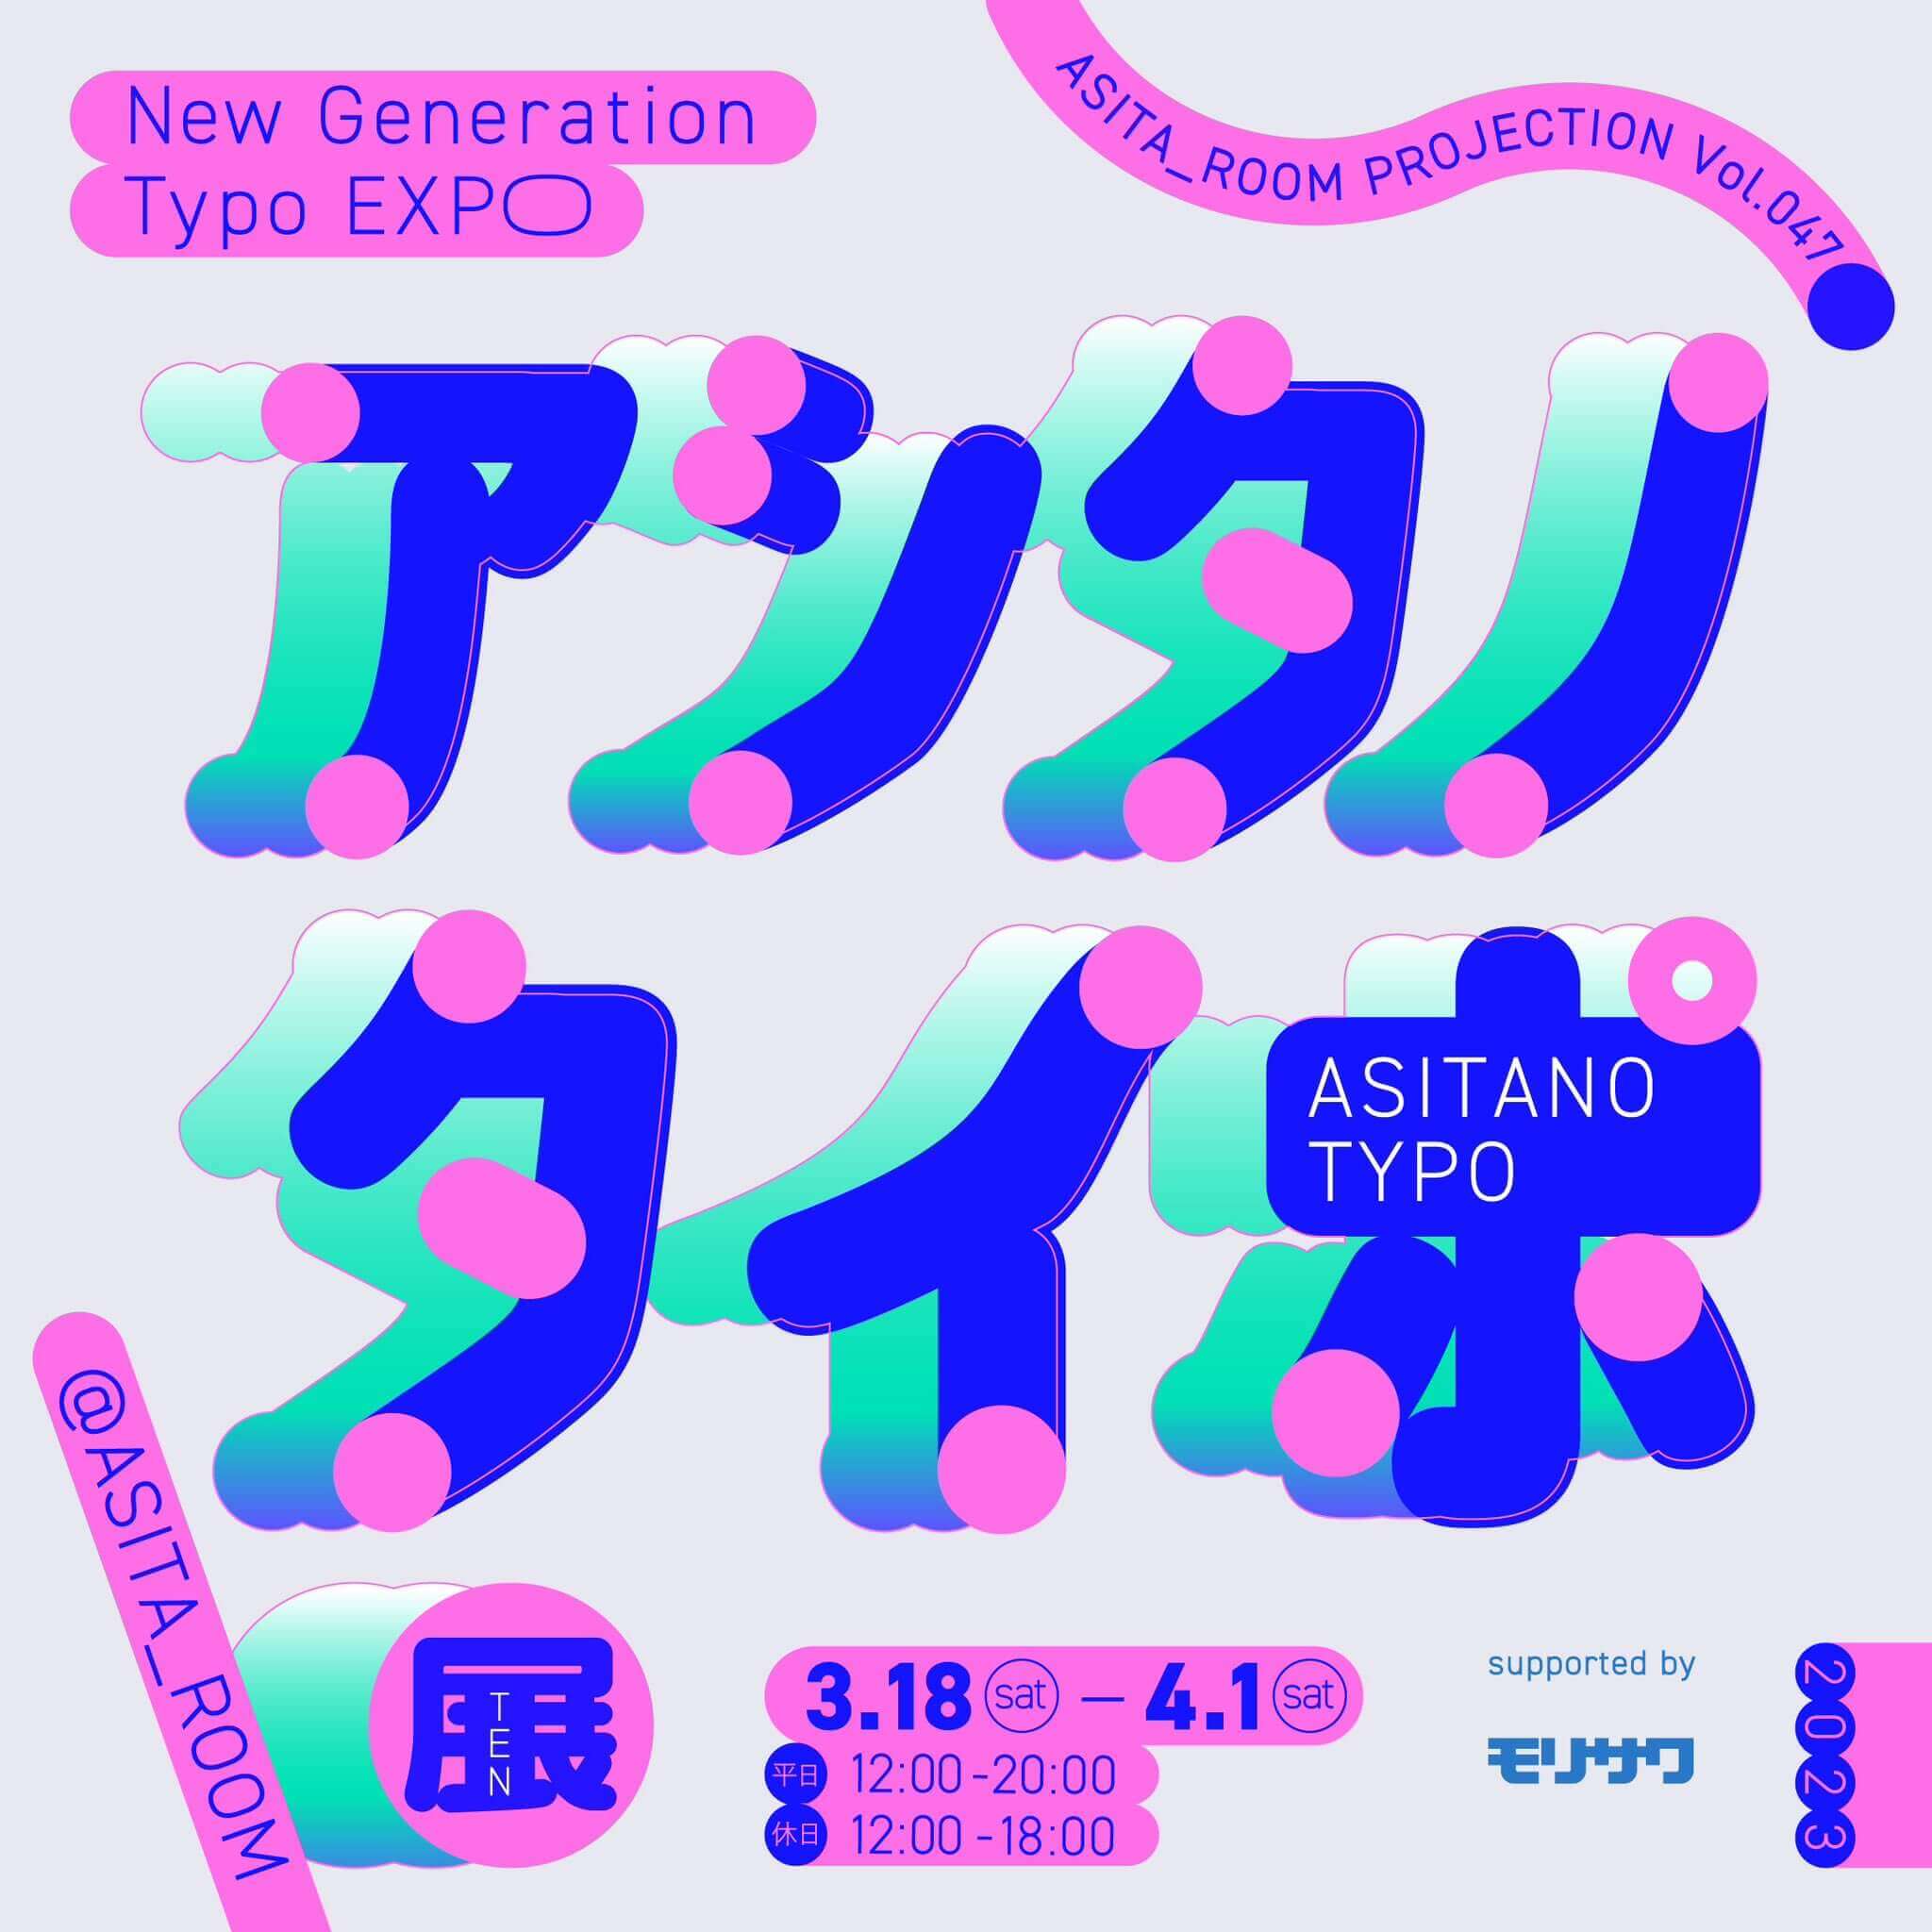 New Generation Typo EXPO アシタノタイポ展 supported by モリサワ 